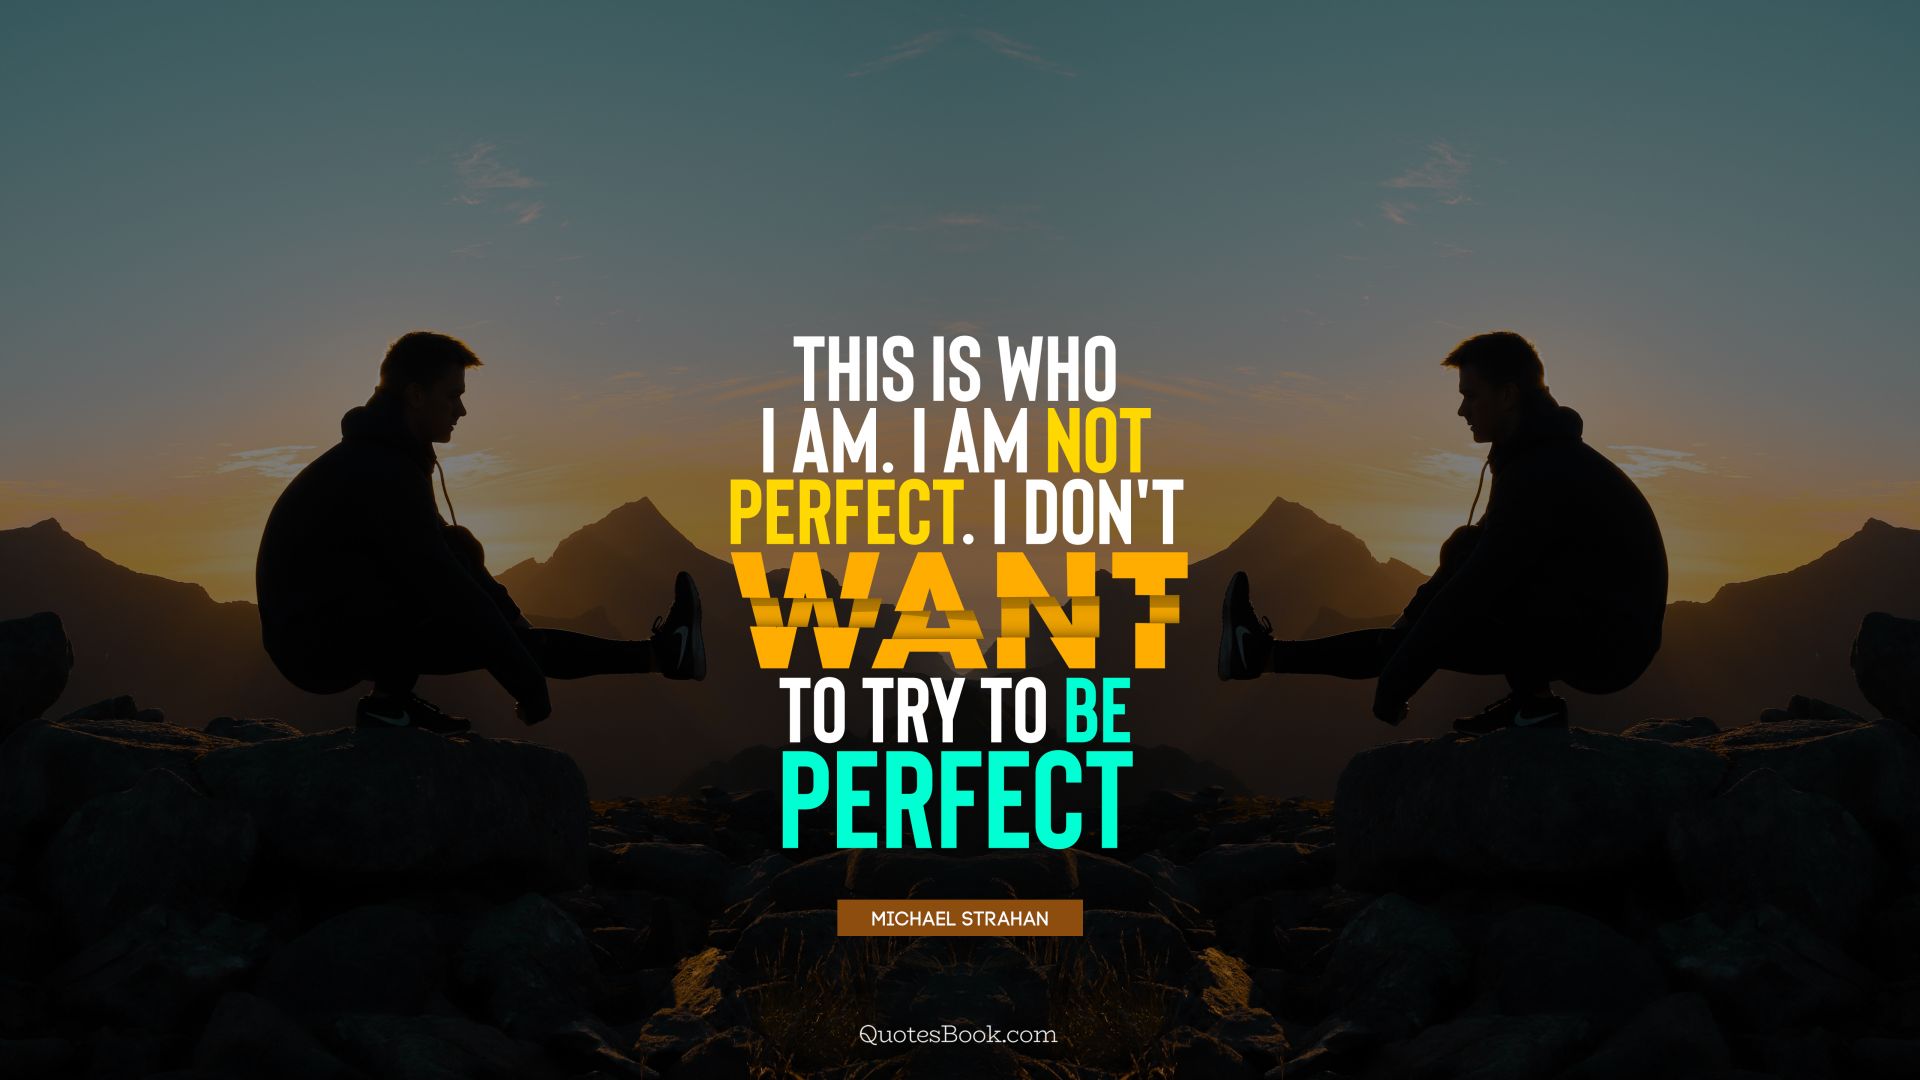 This is who I am. I'm not perfect. I don't want to try to be perfect. - Quote by Michael Strahan